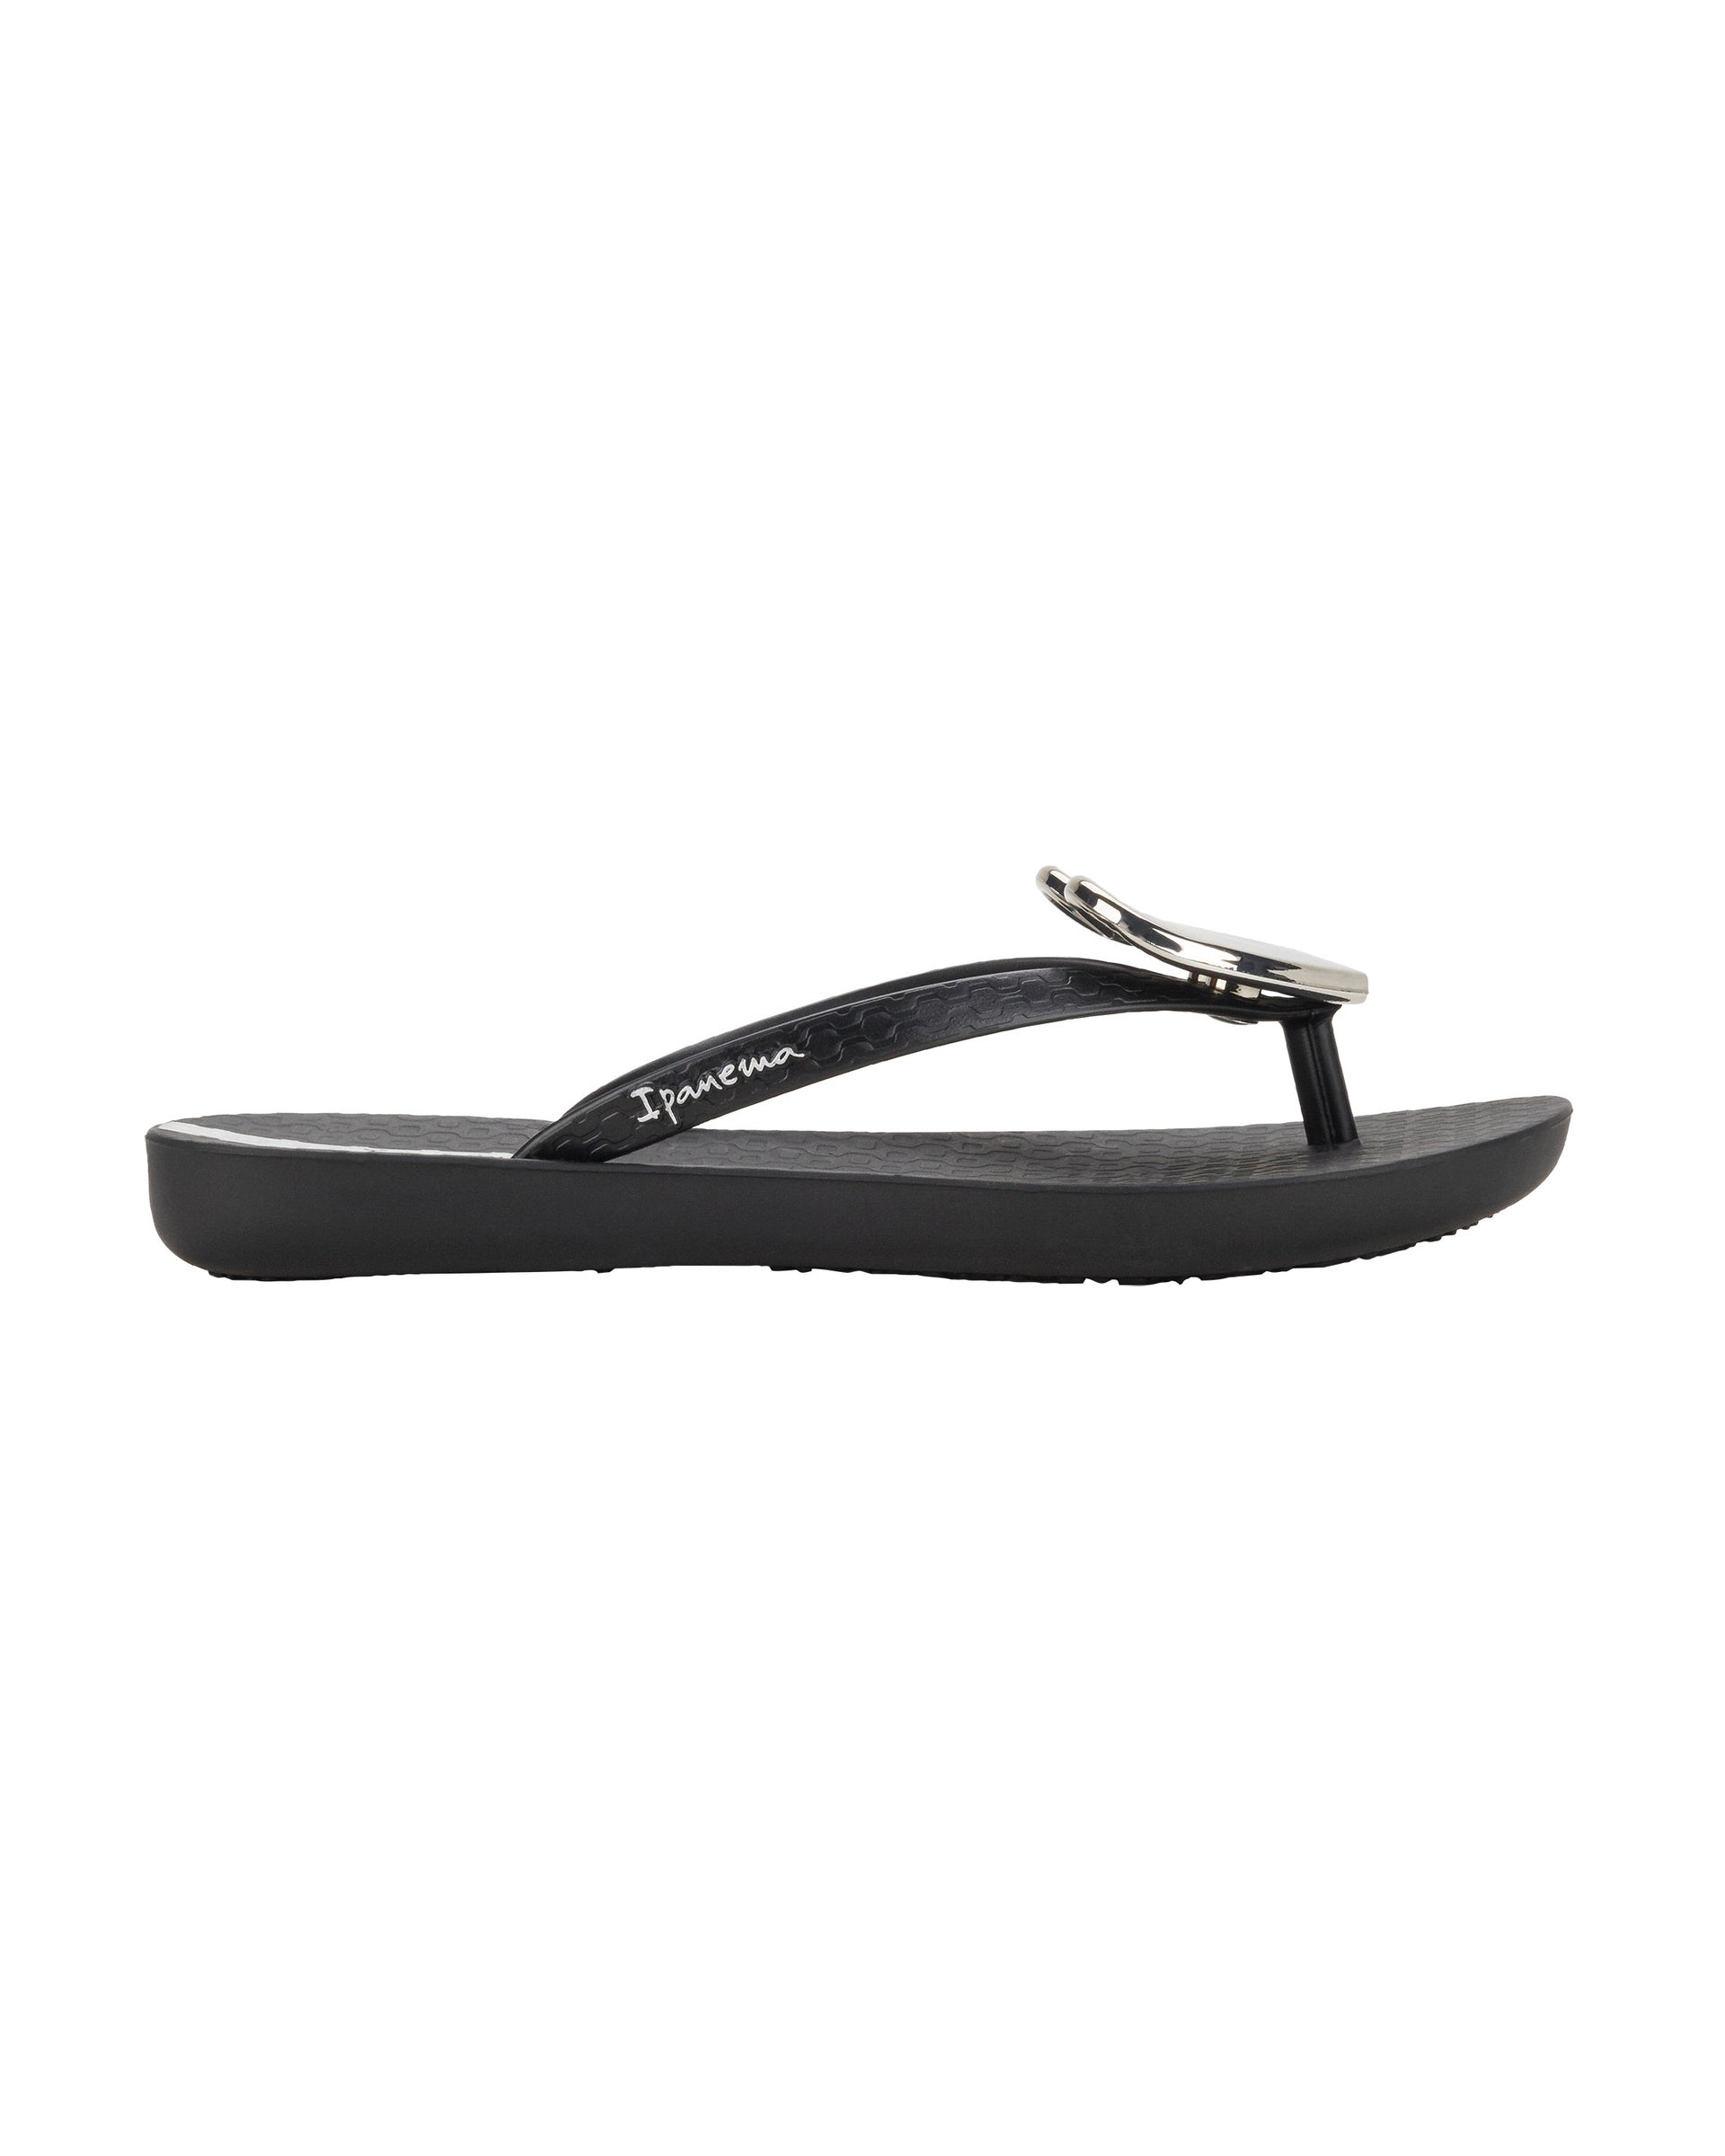 Outer side view of a black Ipanema Wave Heart kids flip flop with gold decorative heart on the upper.